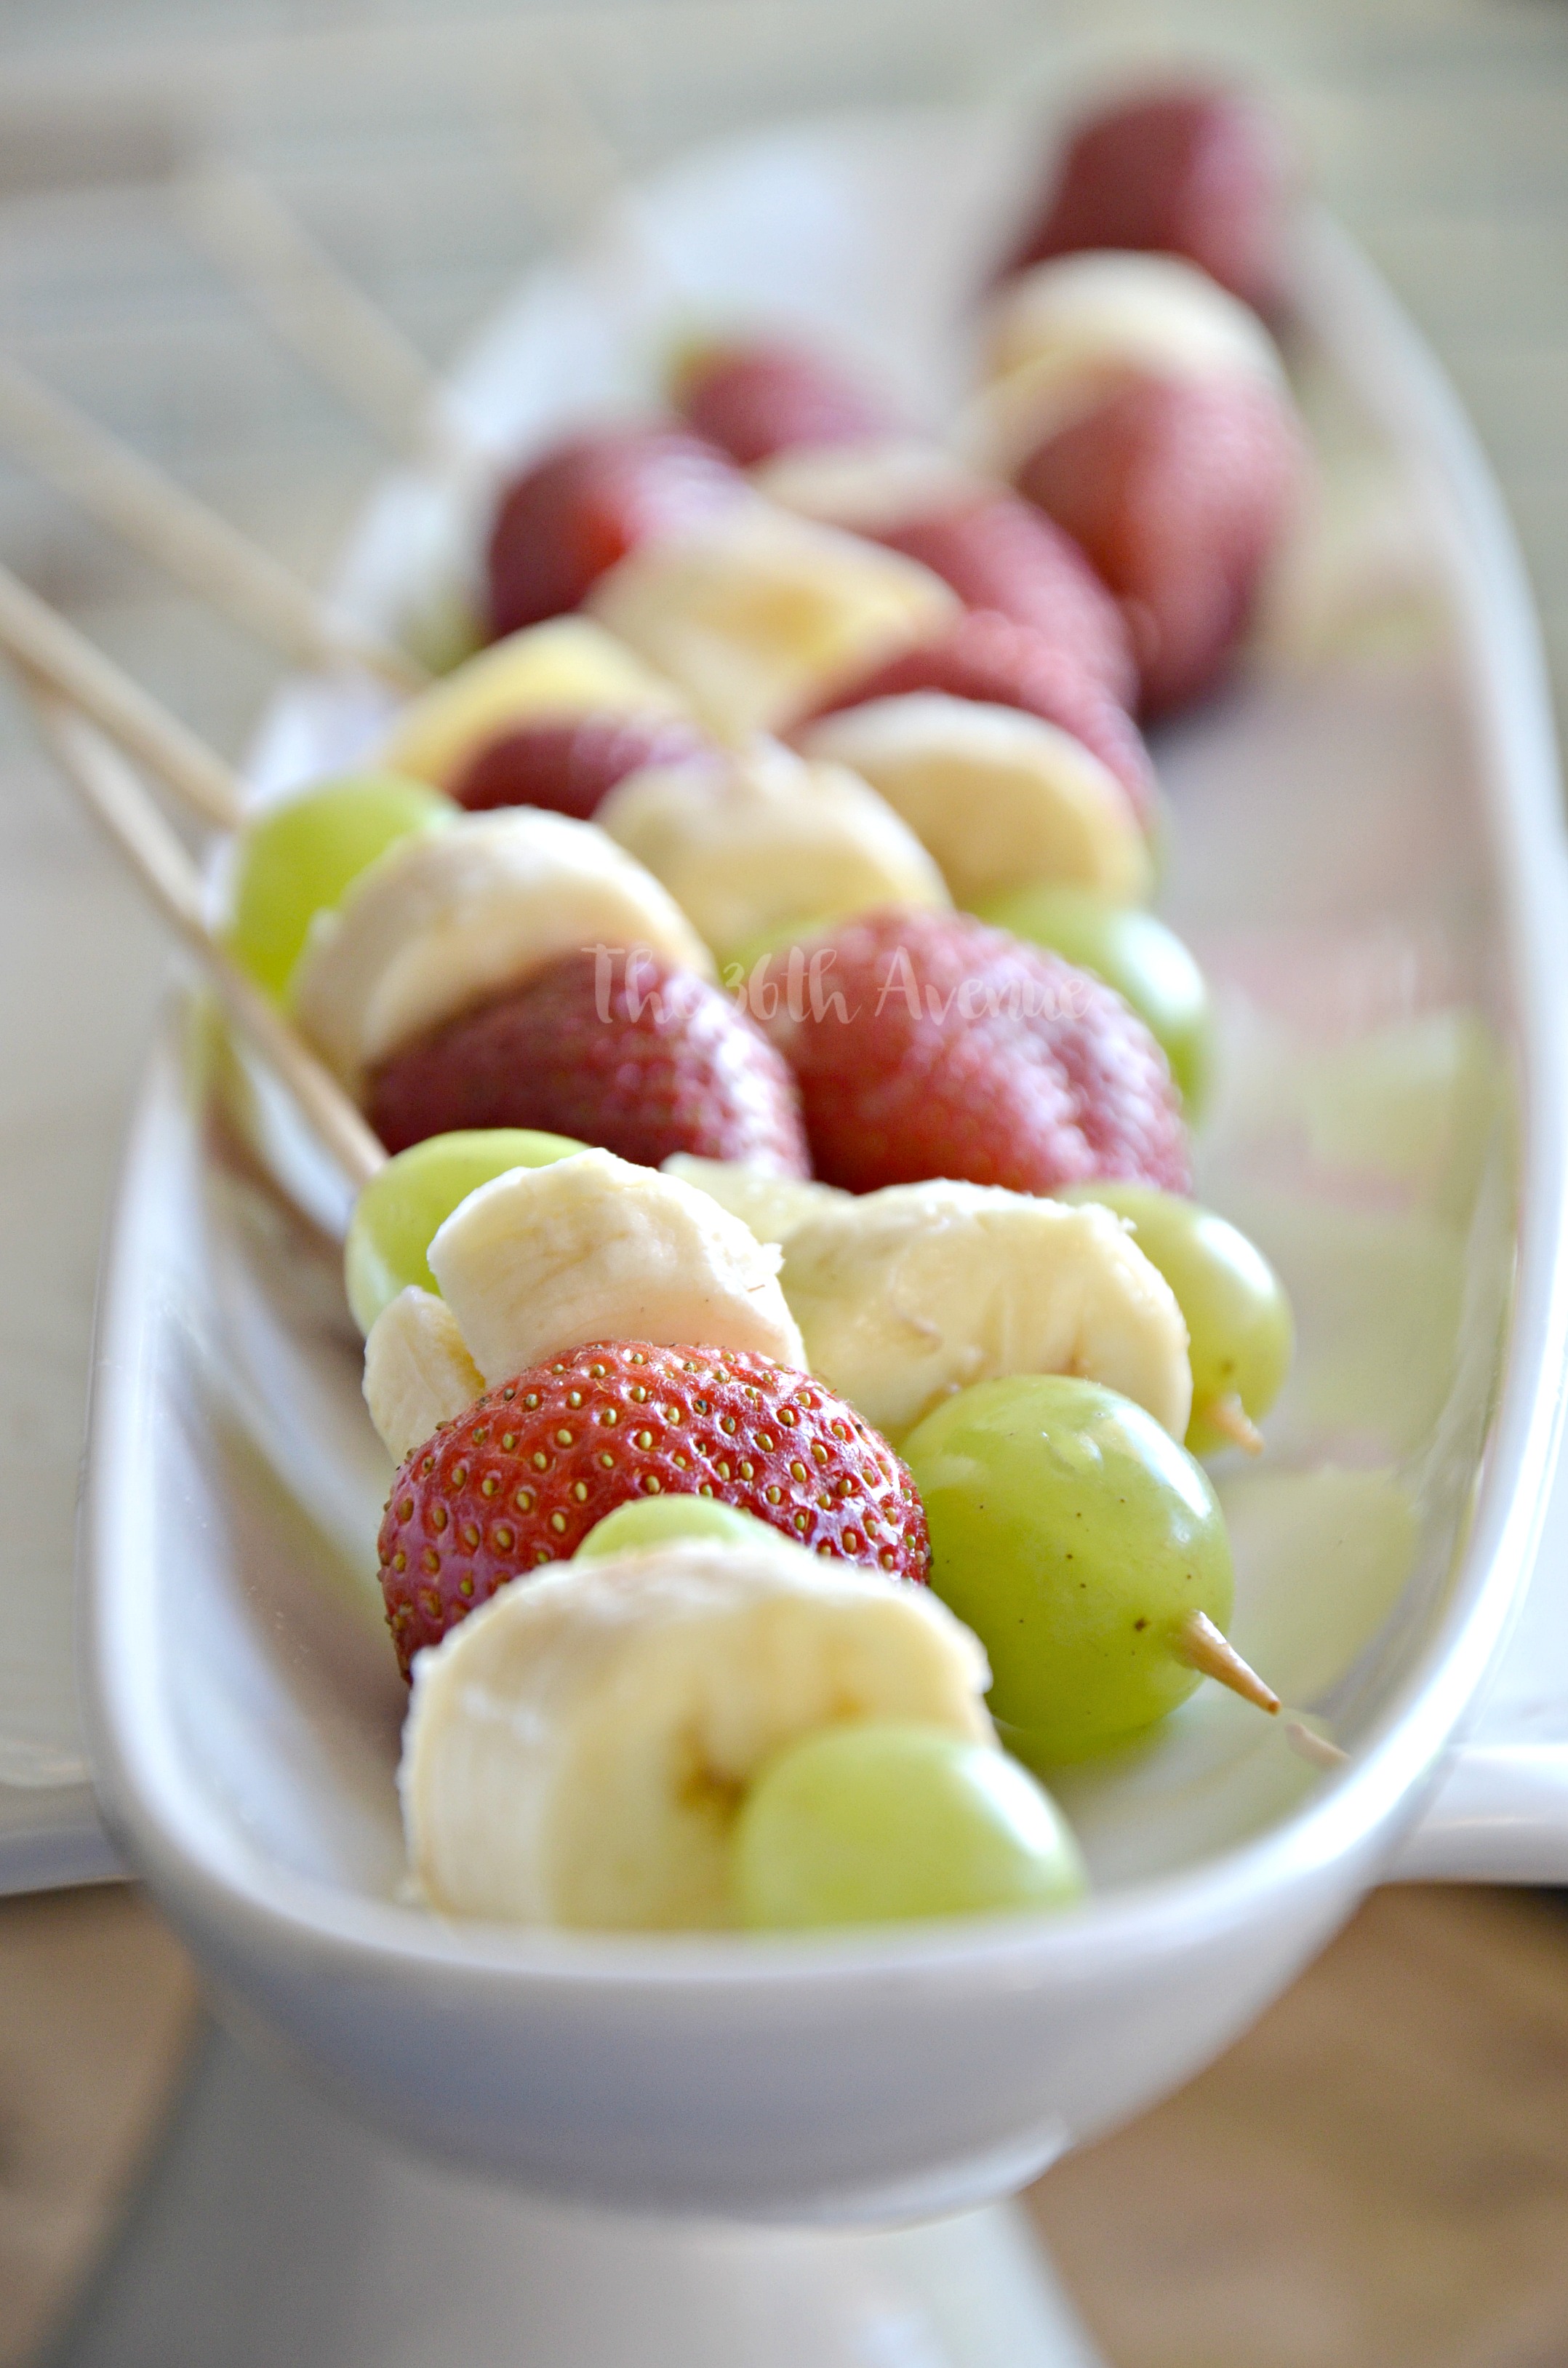 Fruit Shish Kabobs and Skinny Strawberry Dip Recipe. Pin it now and make it later. 